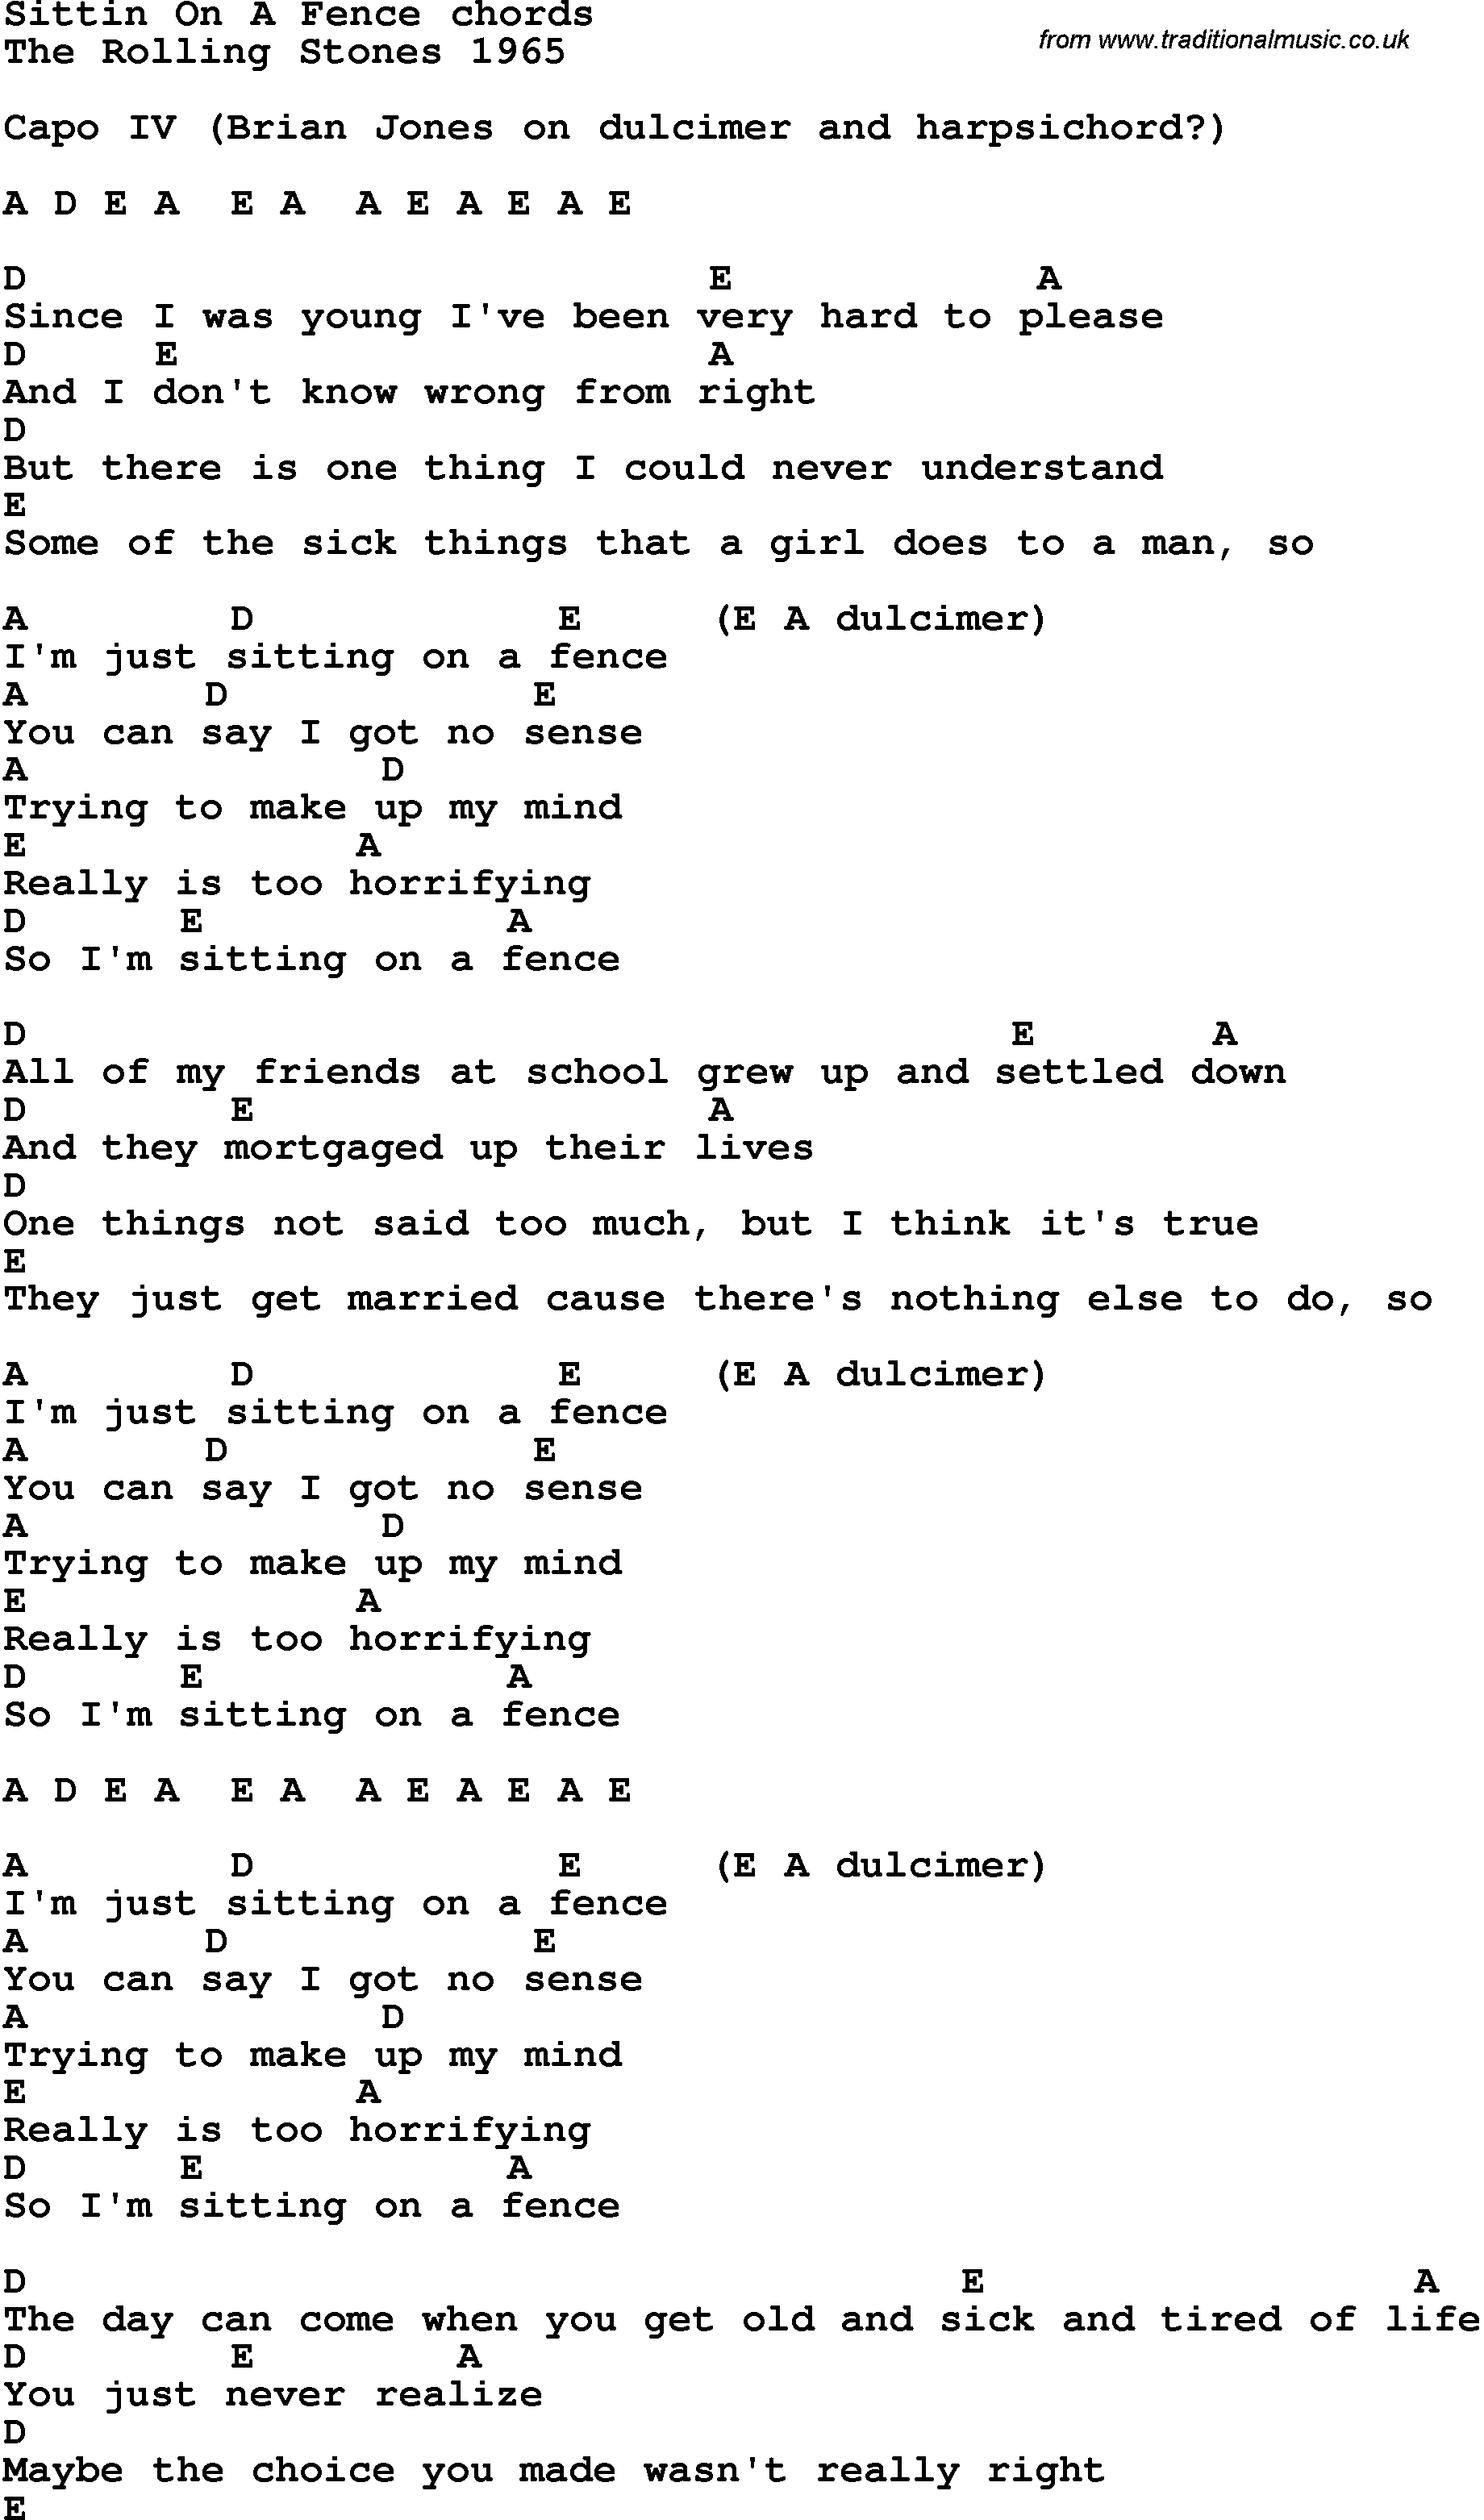 Song Lyrics with guitar chords for Sitting On A Fence